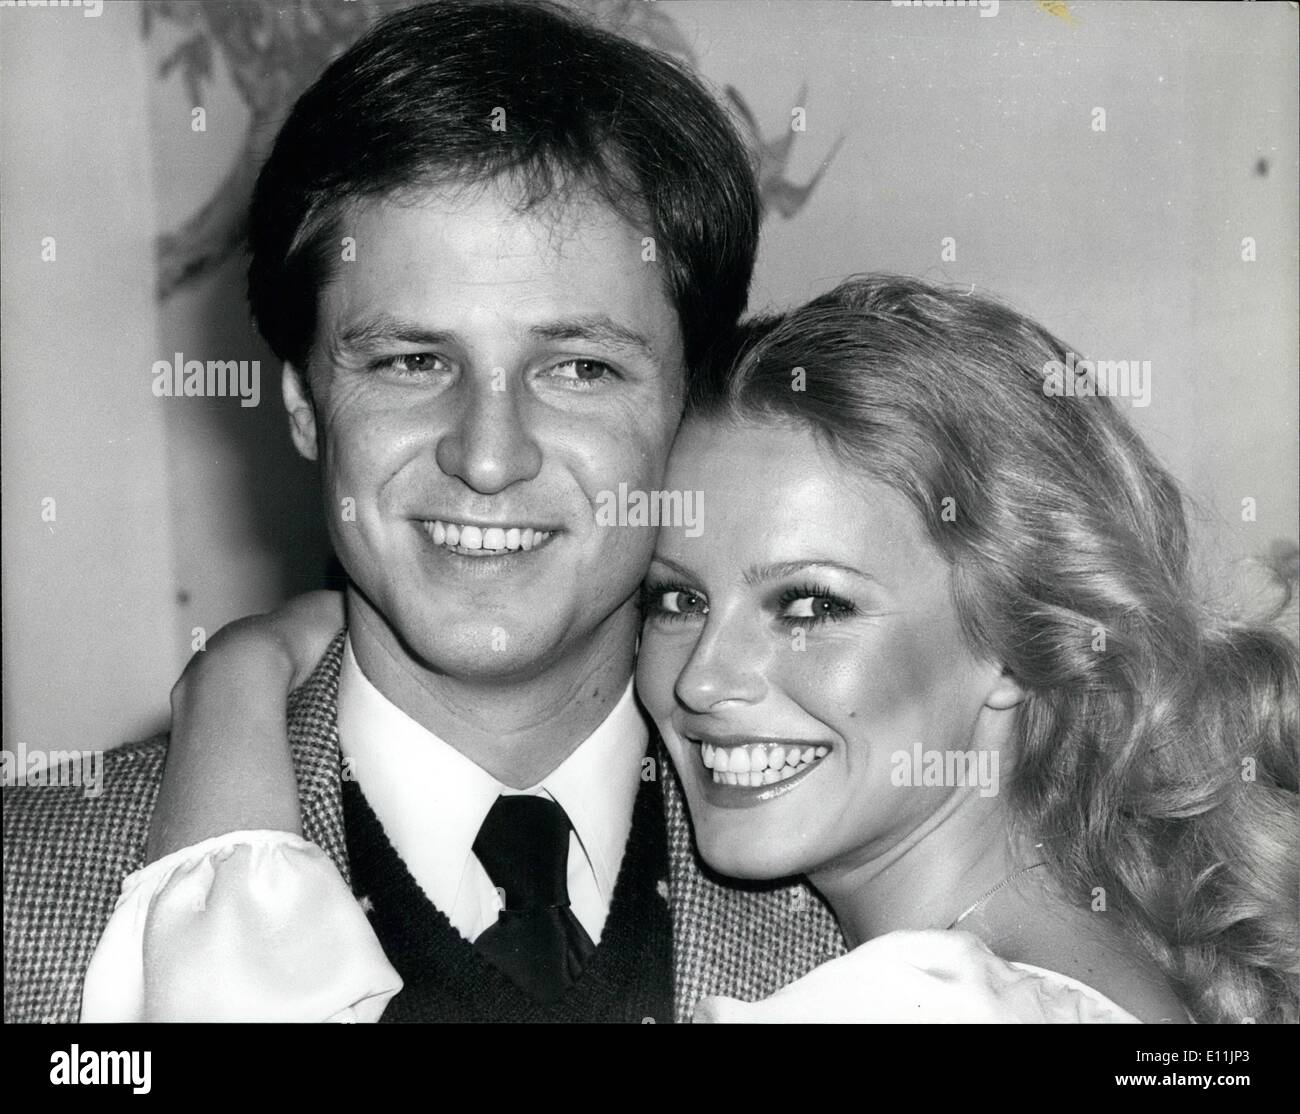 May 05, 1978 - Charlie's Angel Cheryl Ladd Arrives in London Cheryl Ladd arrived in London yesterday to record a Muppet Show and she will also be promoting her first LP, which will be released later this year. Photo Shows: Cheryl Ladd with her husband Alan during a reception at the Berkley Hotel, by Capitol Records, which she recently signed a recording contract. Stock Photo